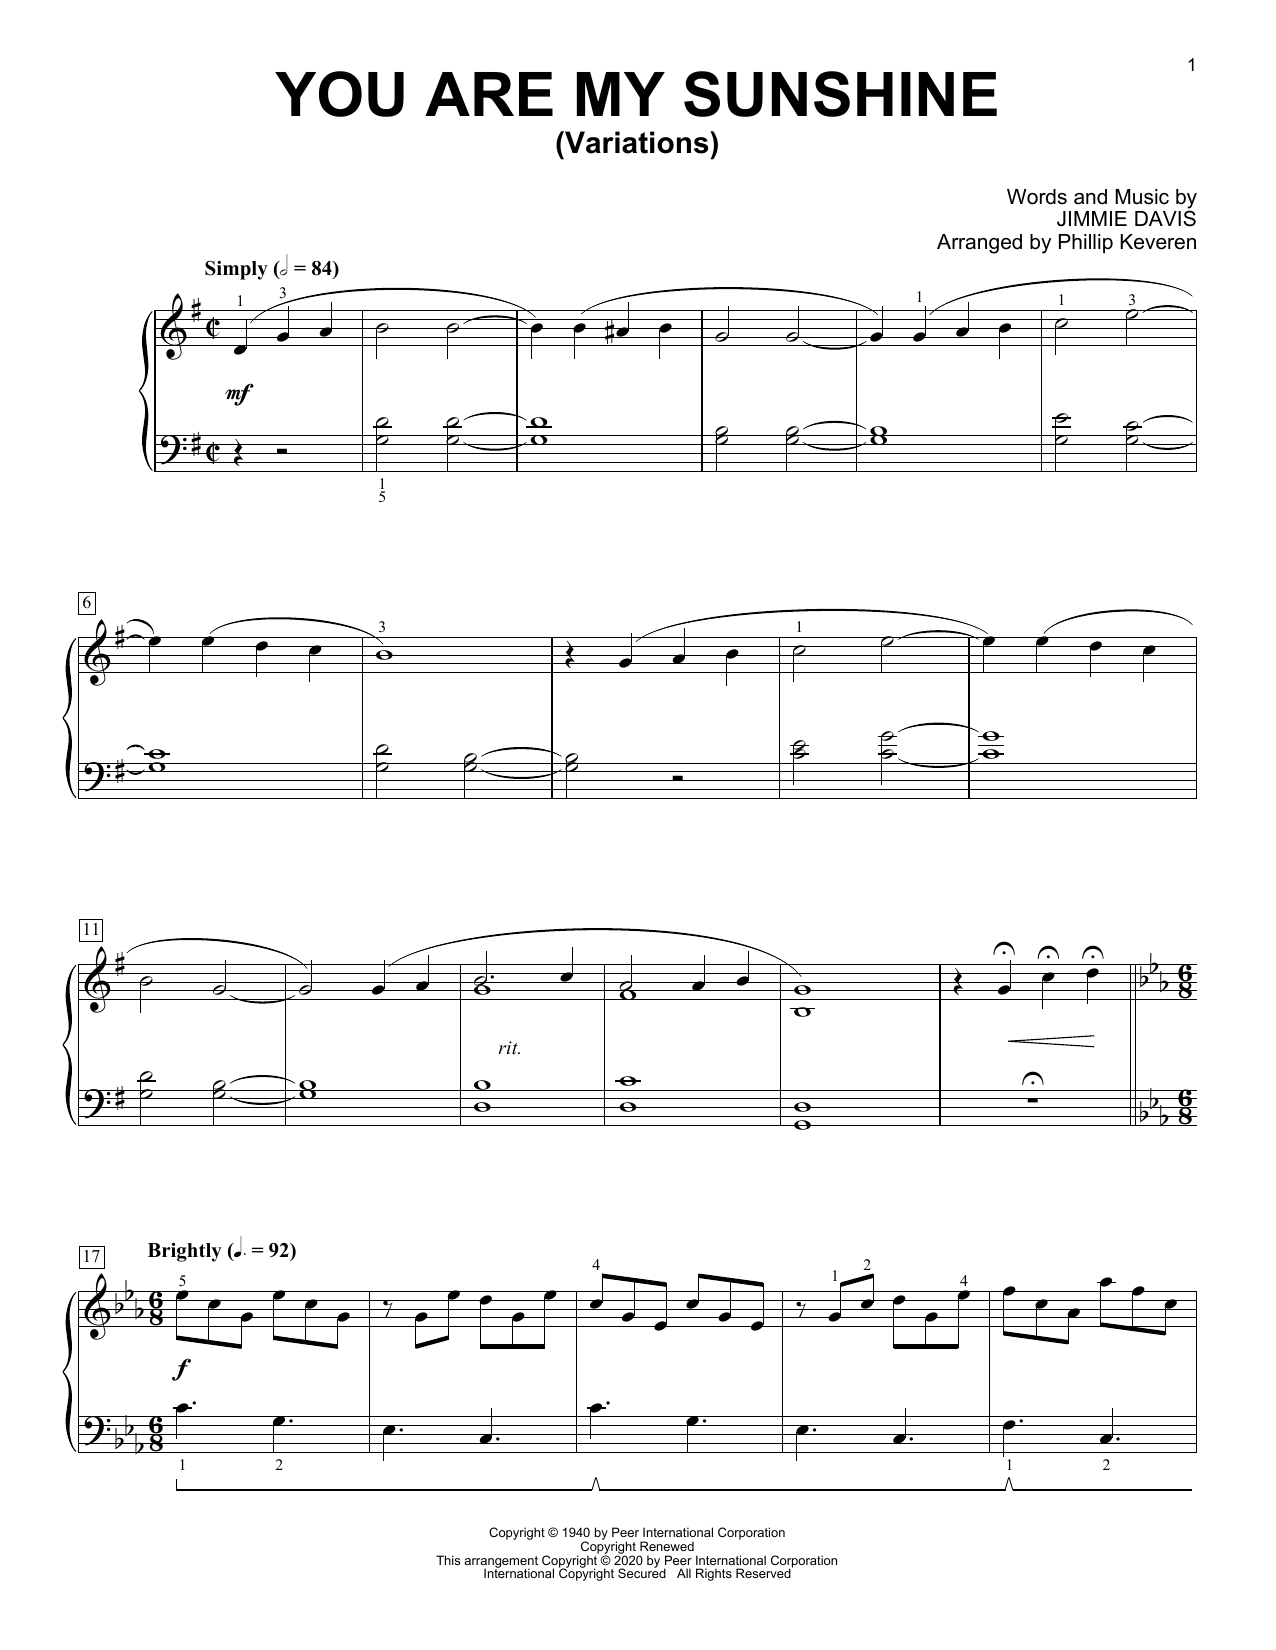 Download Ray Charles You Are My Sunshine [Classical version] Sheet Music